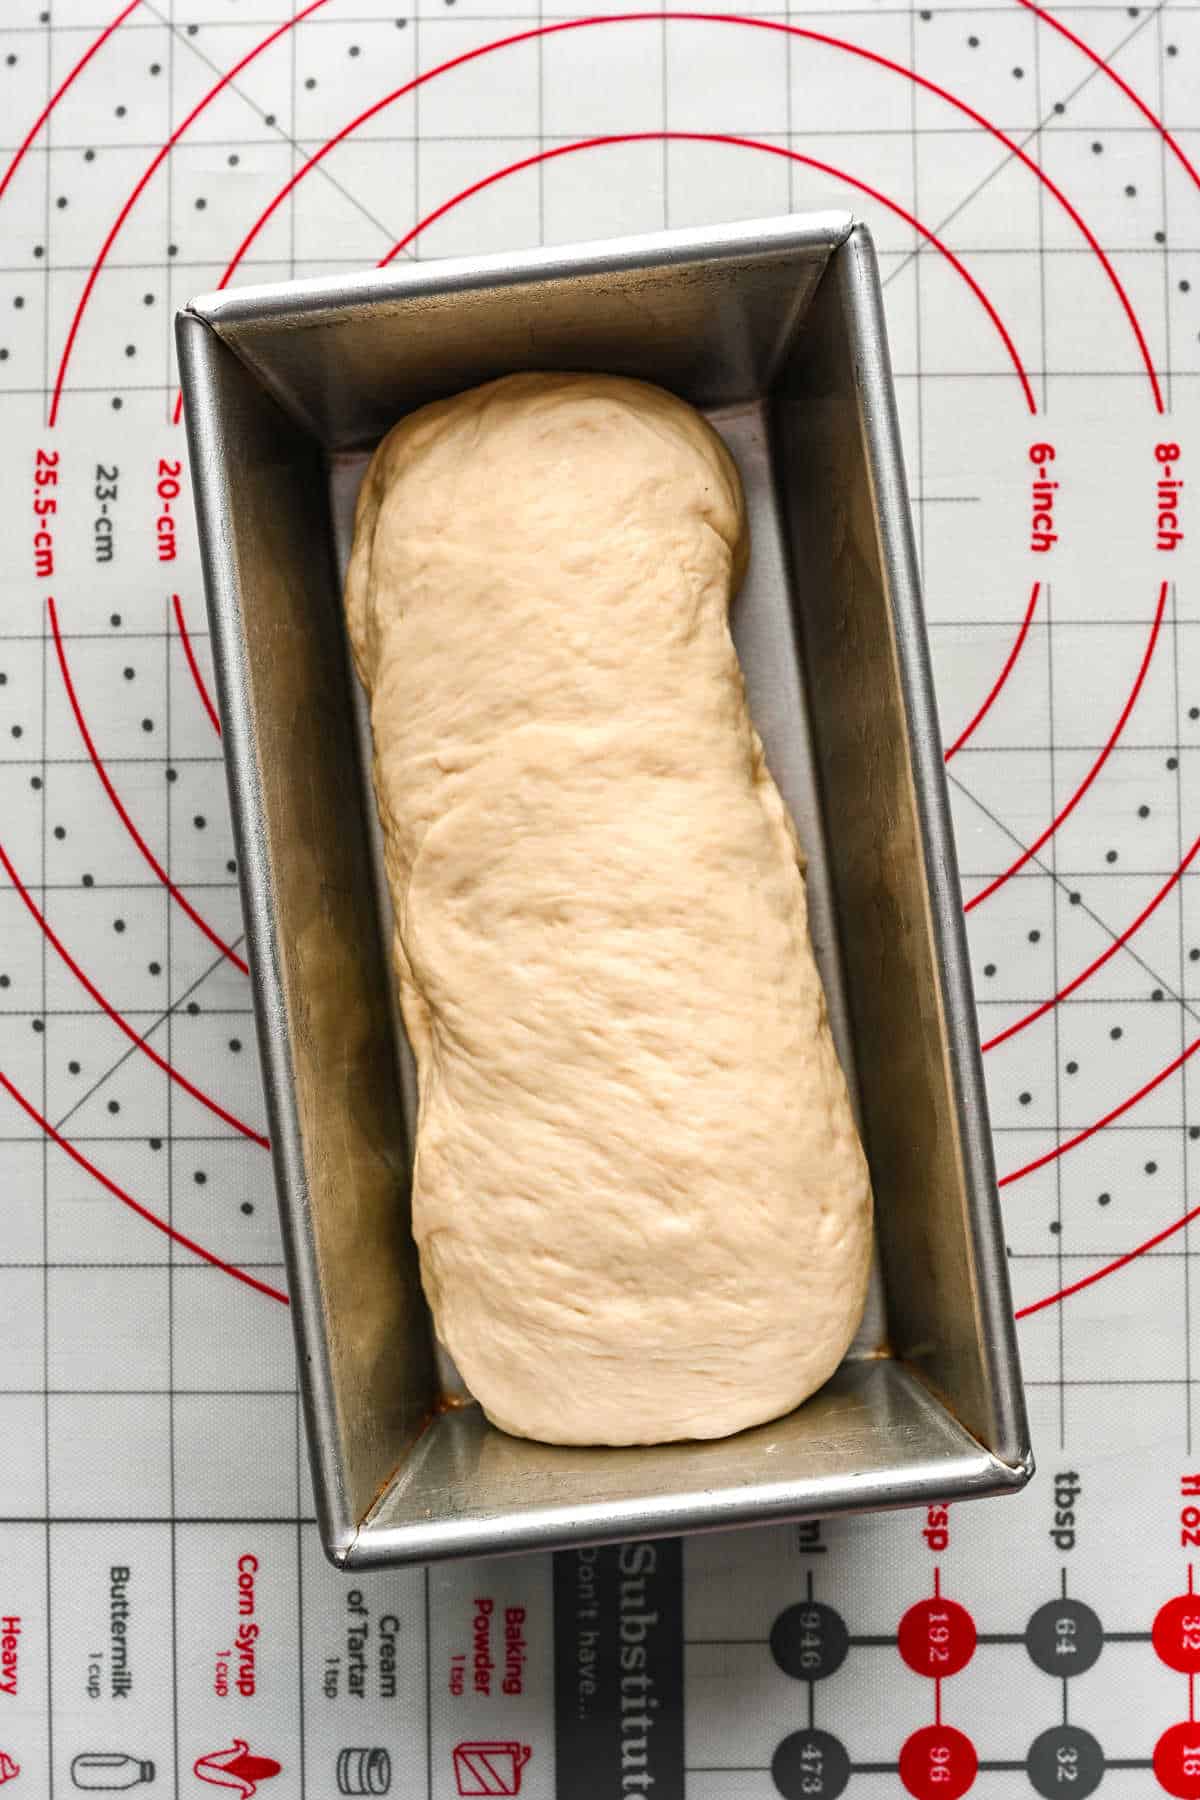 White bread dough shaped into a loaf in a loaf pan.